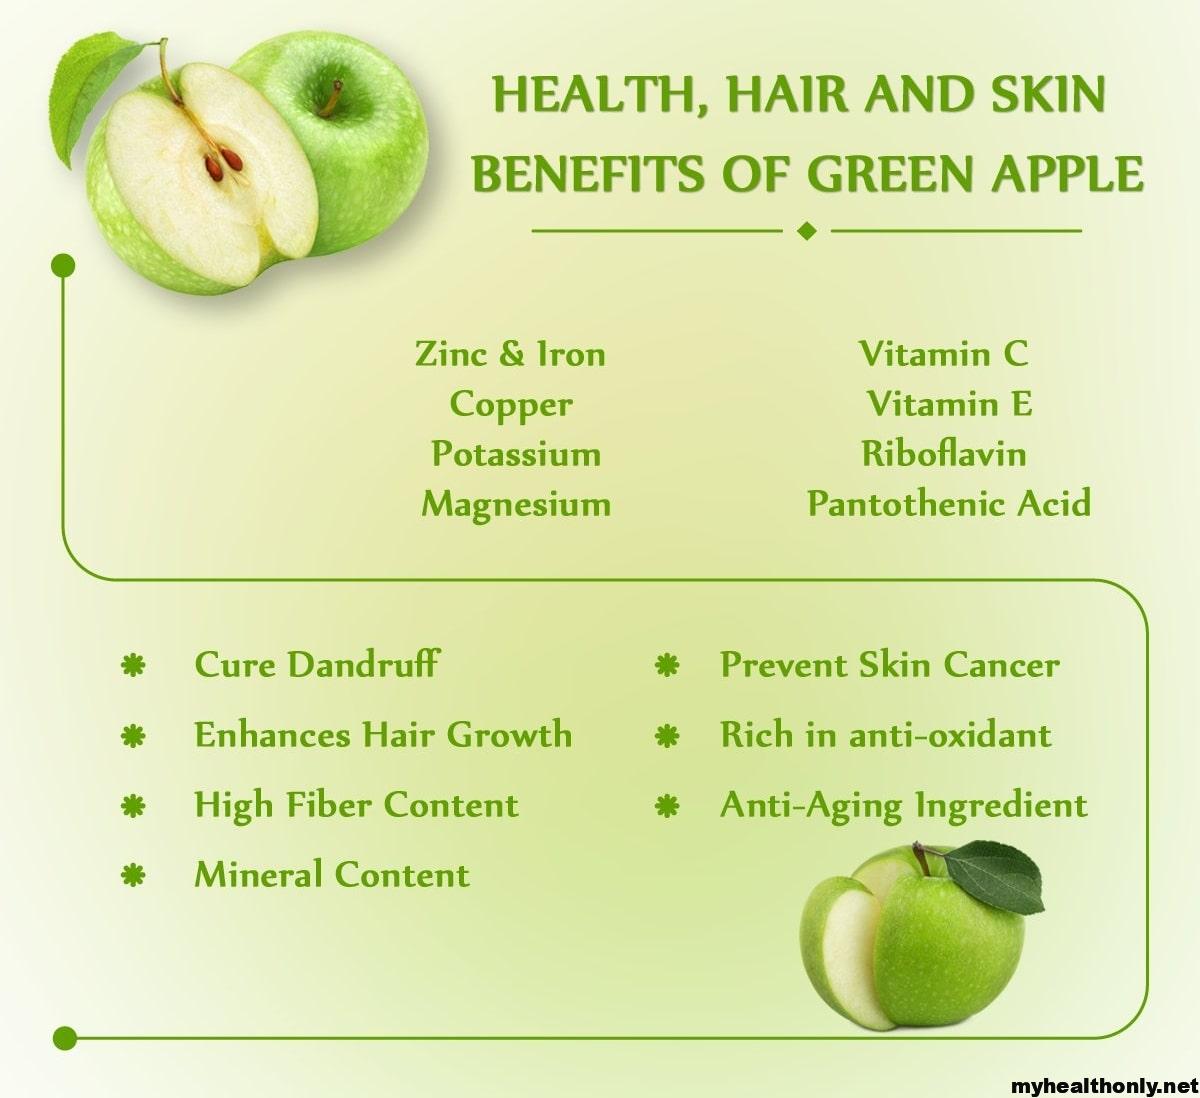 Green Apple: Uses, Benefits, Side Effects and More! - PharmEasy Blog